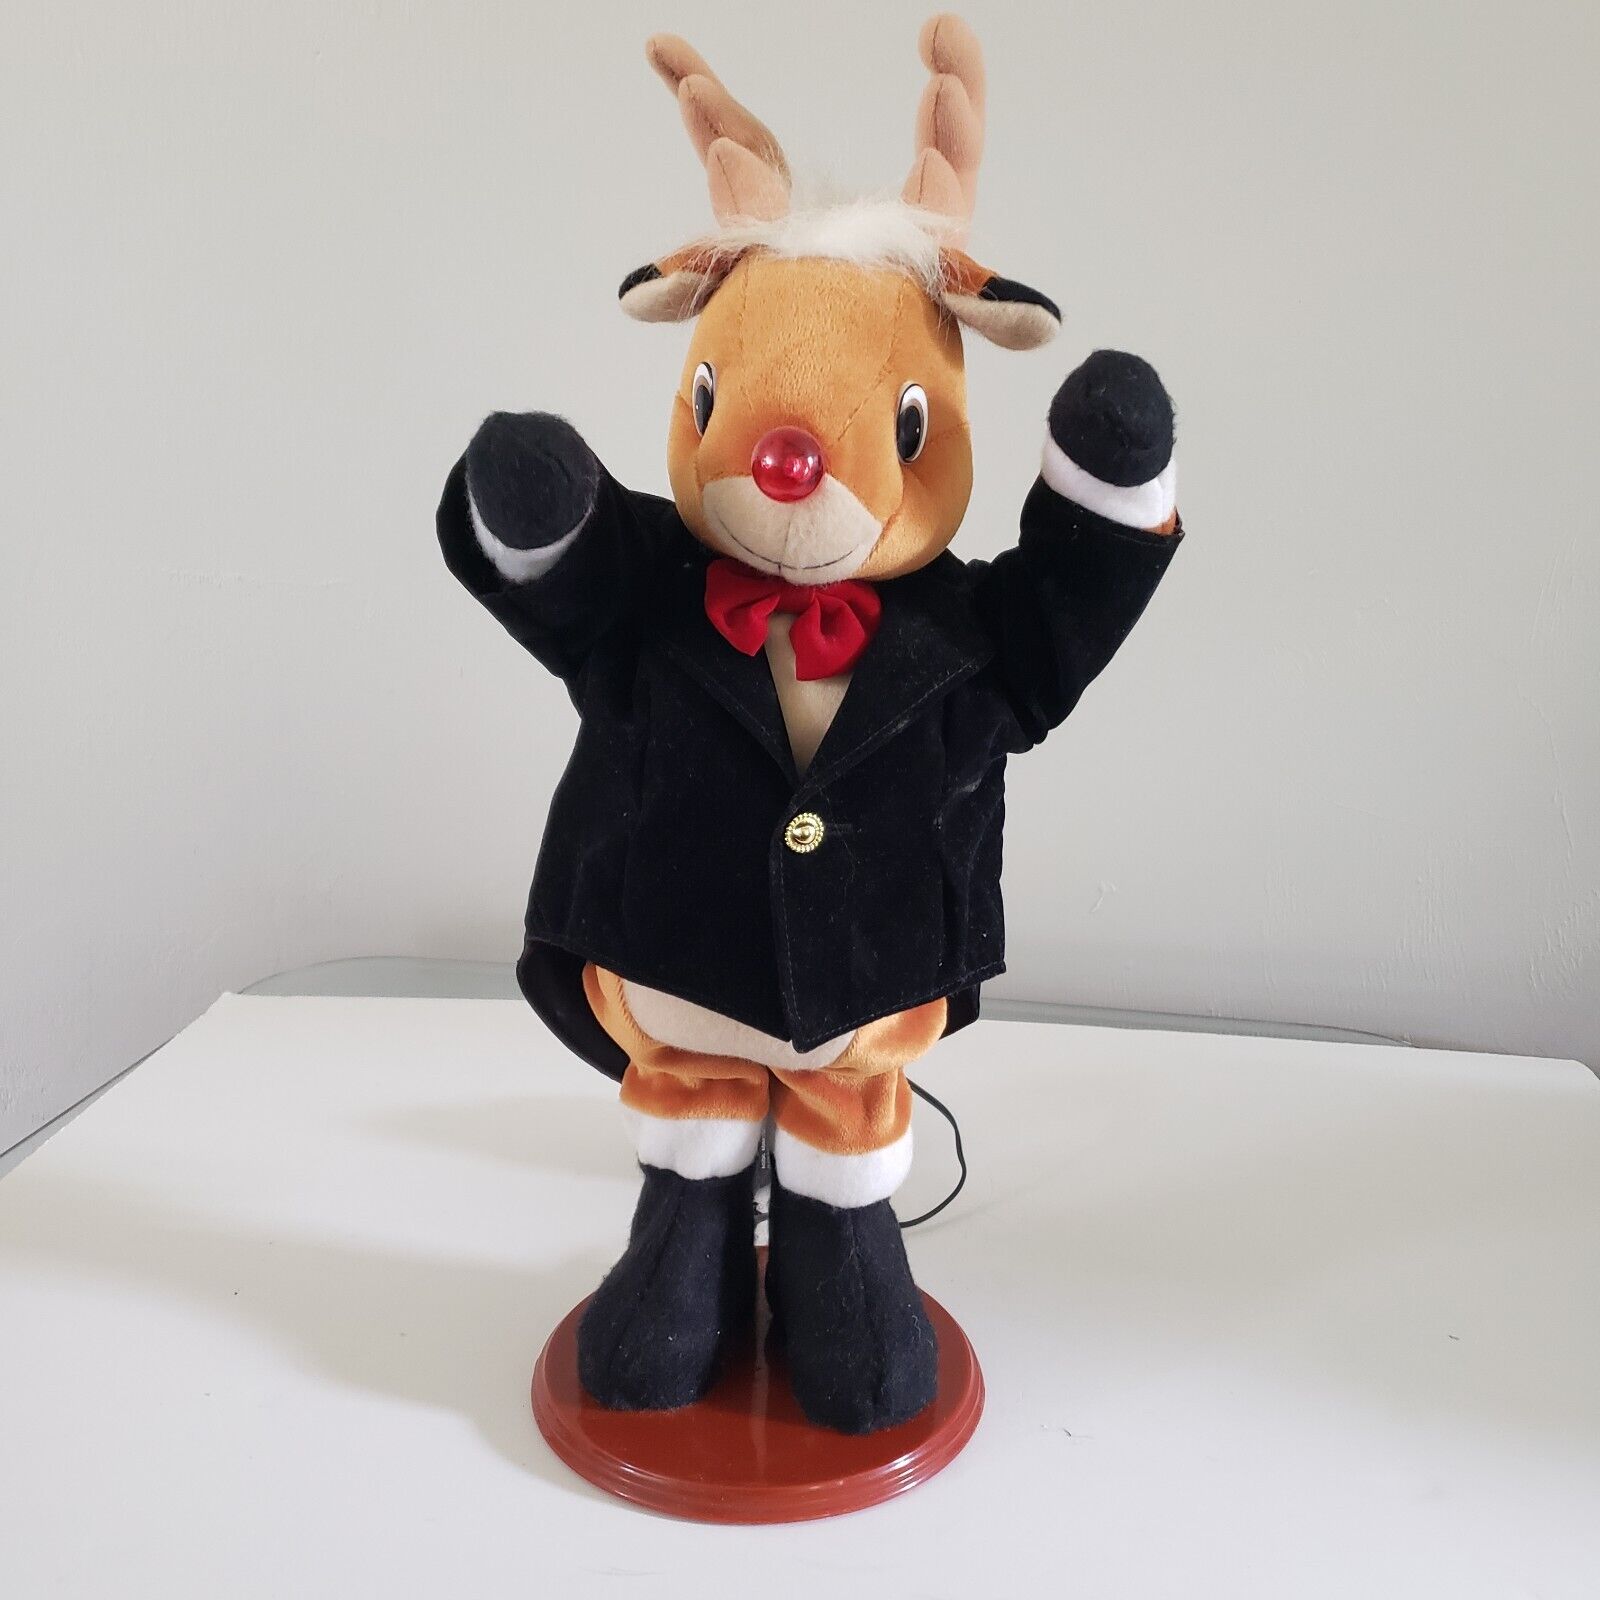 1977 Dancing Musical Rudolph the Red-Nosed Reindeer Figurine